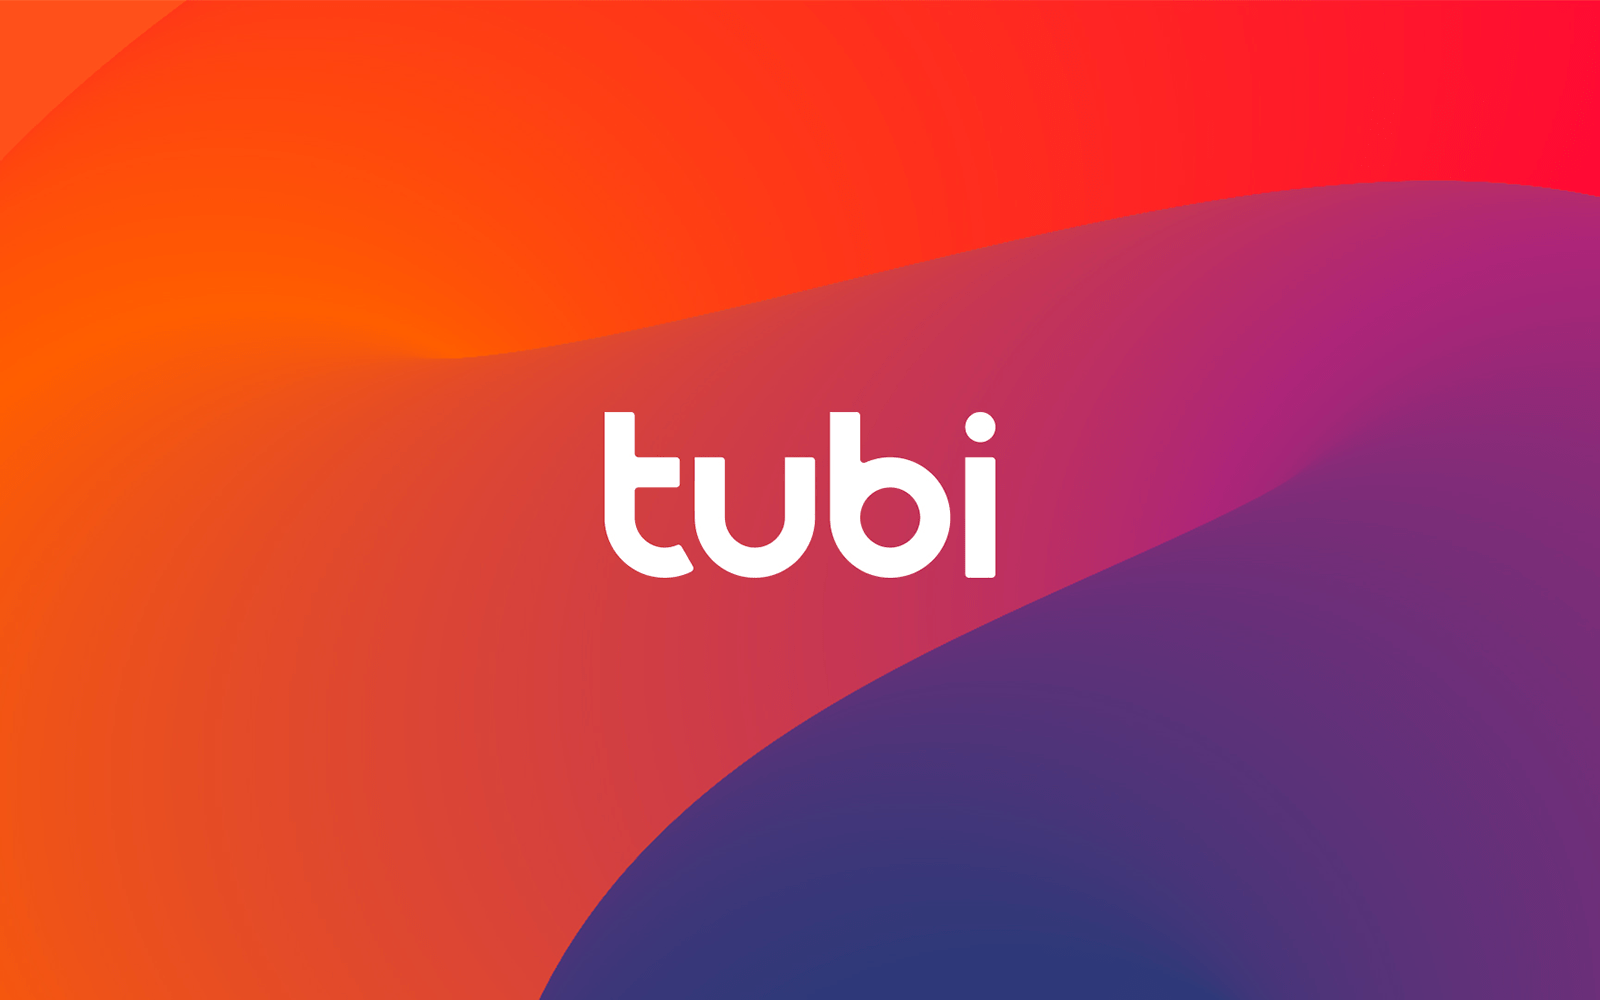 The Tubi logo on a multi-colored background